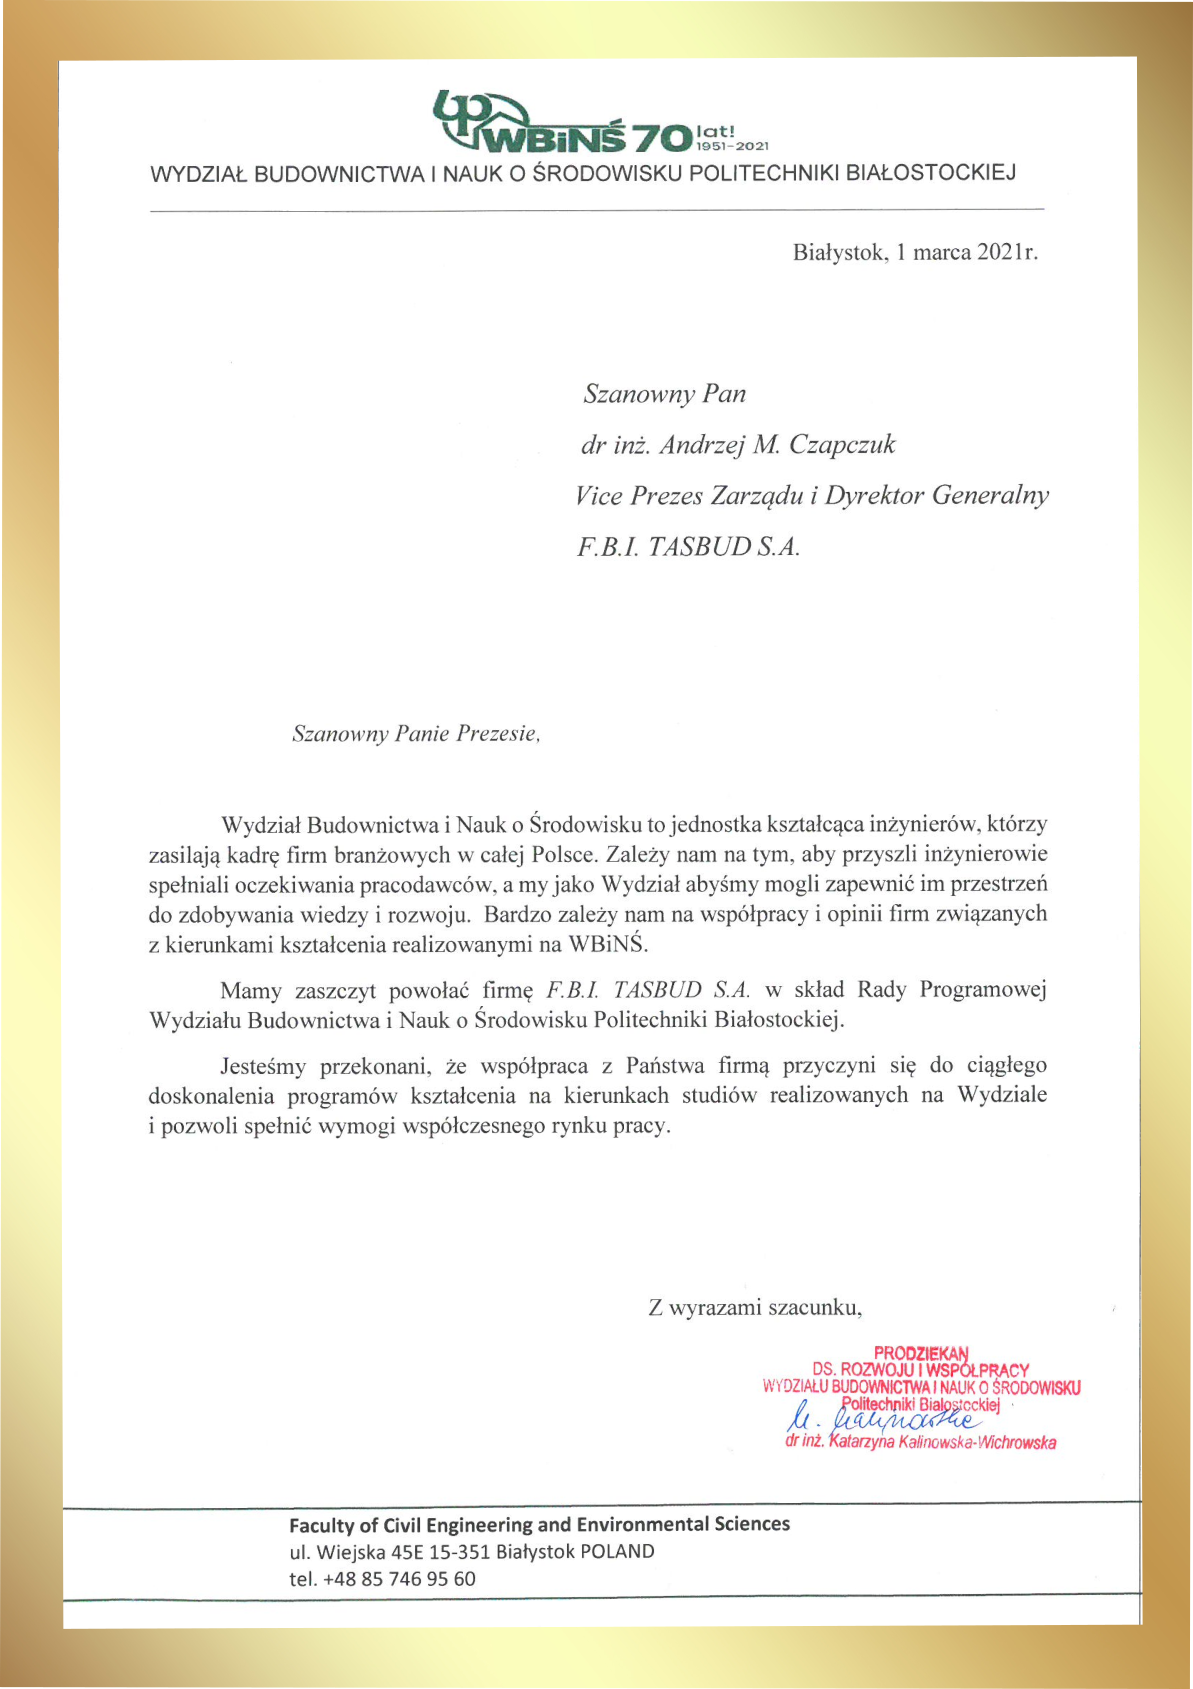 F.B.I. TASBUD International Group as a member of the Council Program of the Faculty of Civil Engineering and Environmental Sciences of the Białystok University of Technology